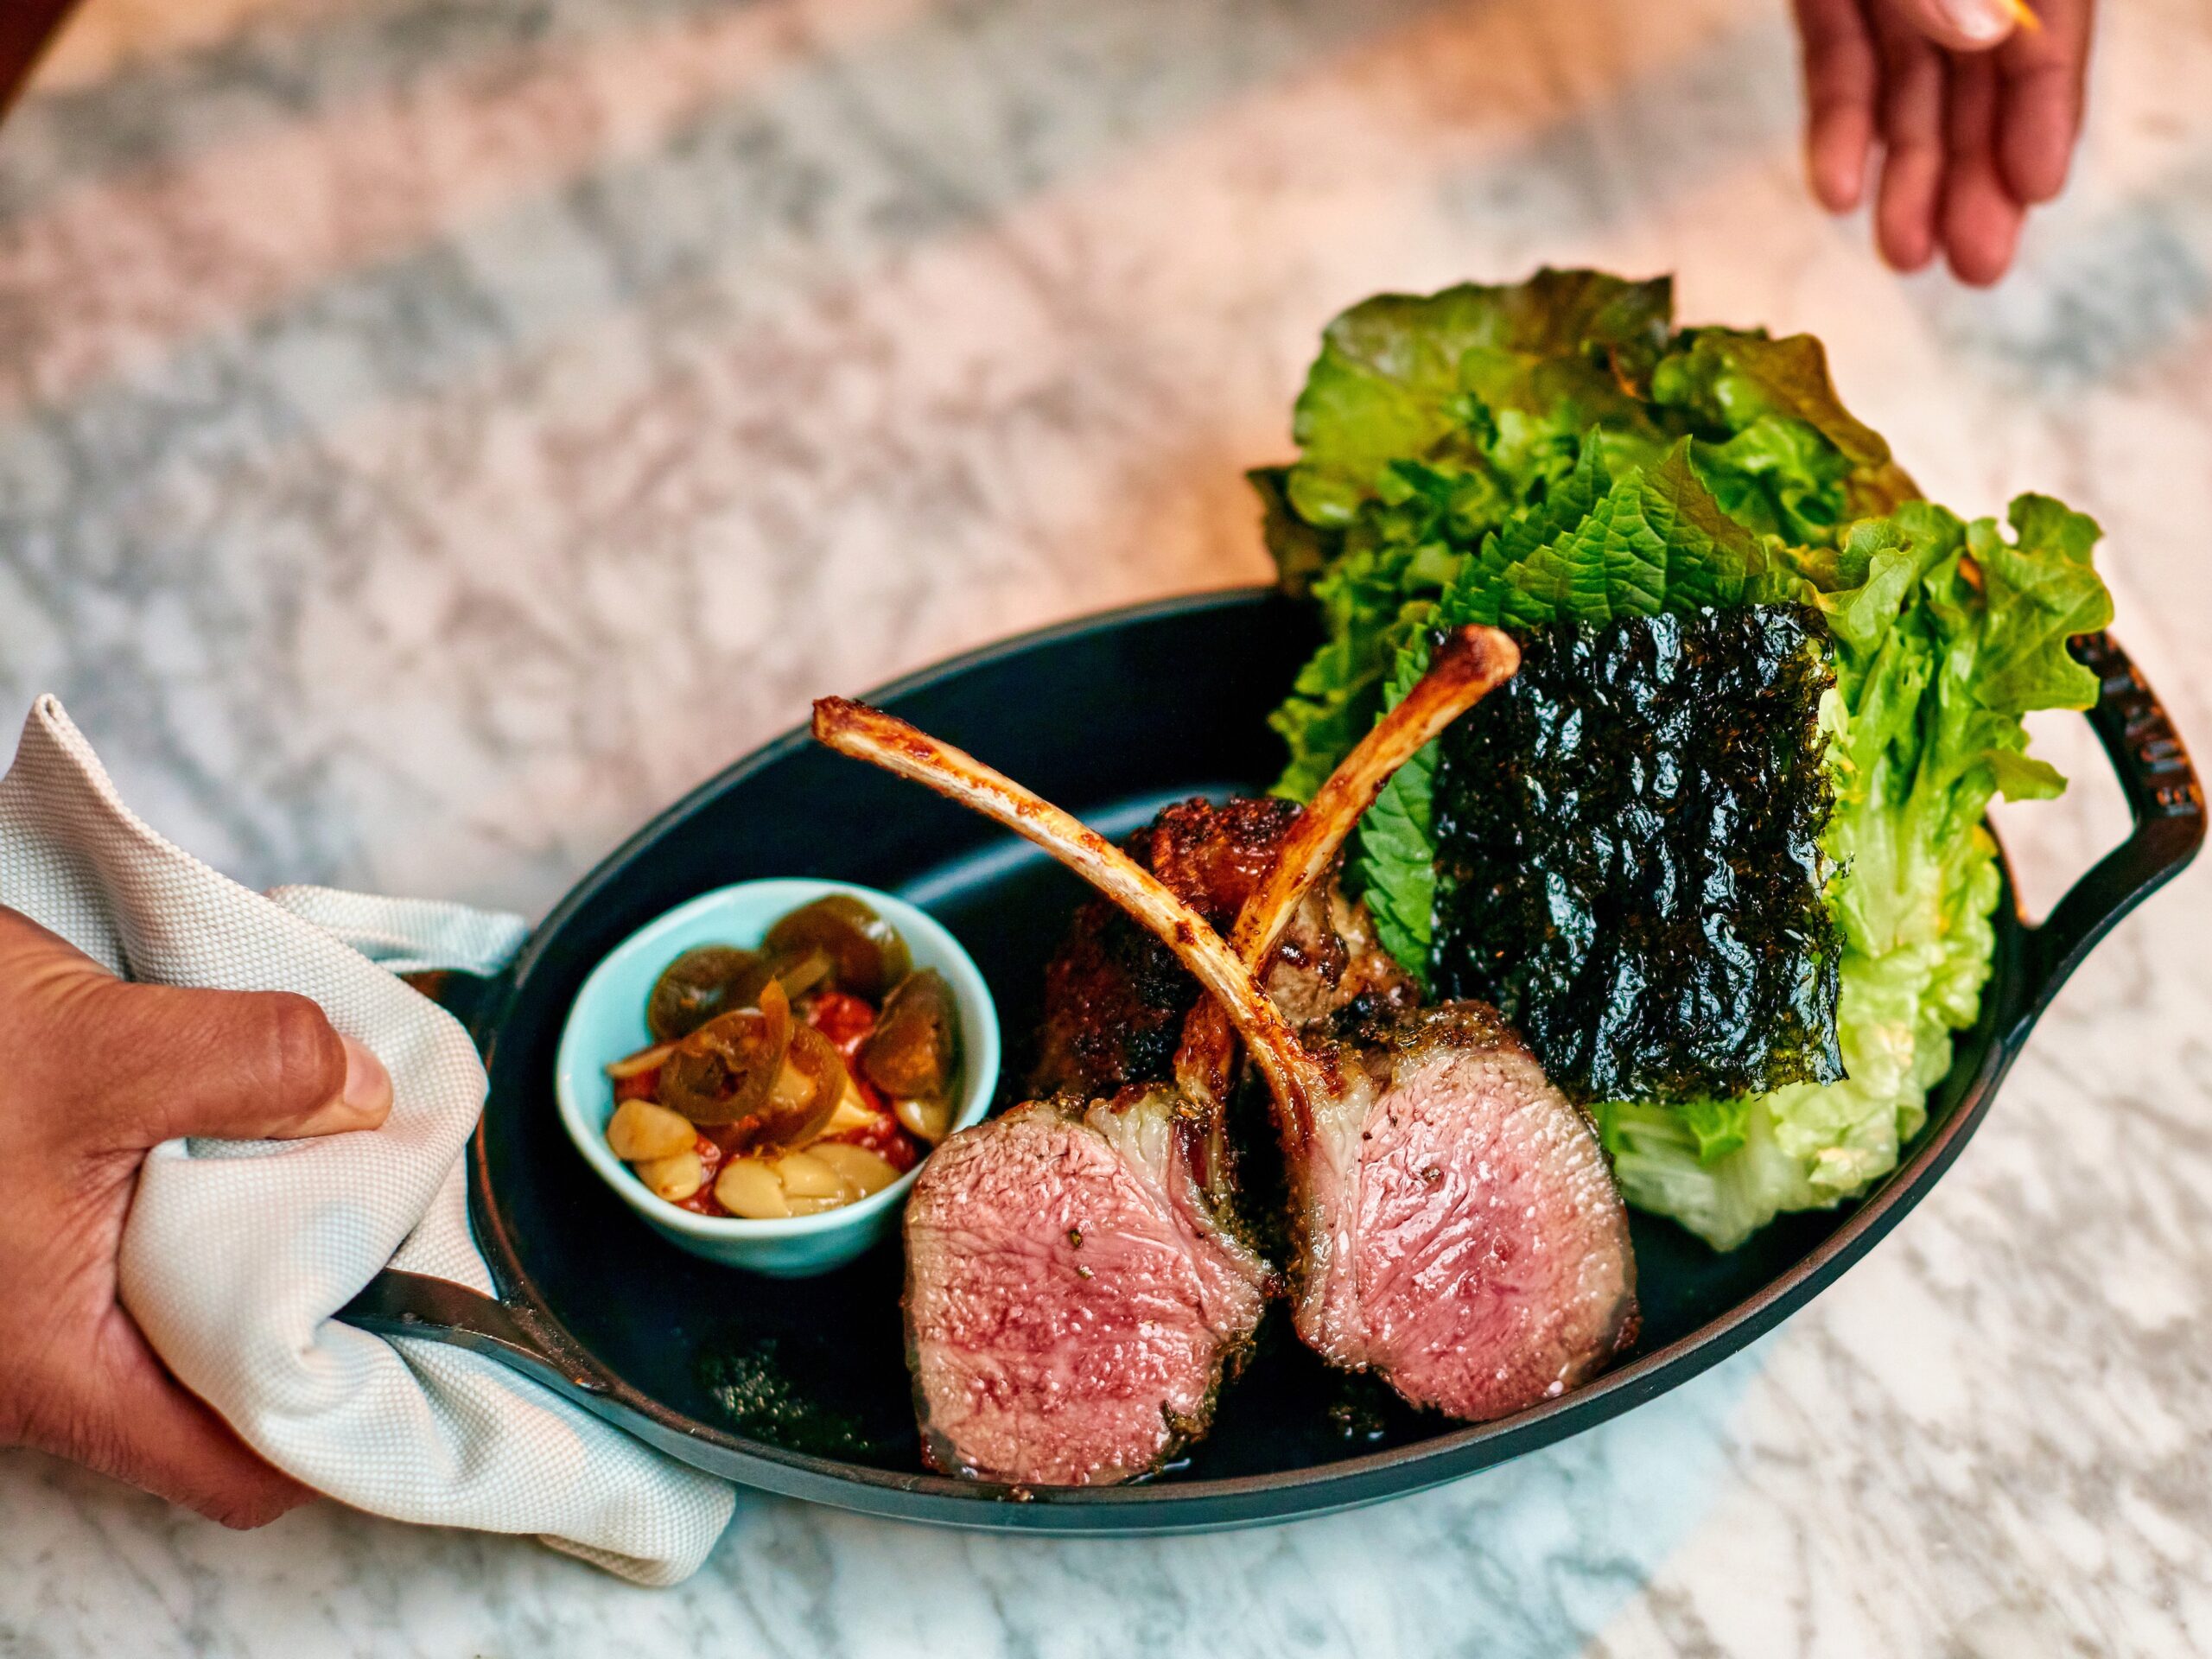 Lamb roasted over a live fire with shiso, nori, and housemade ssamjang at chef Joshua Smookler’s Animo. (Kim Carroll/for Sonoma Magazine)